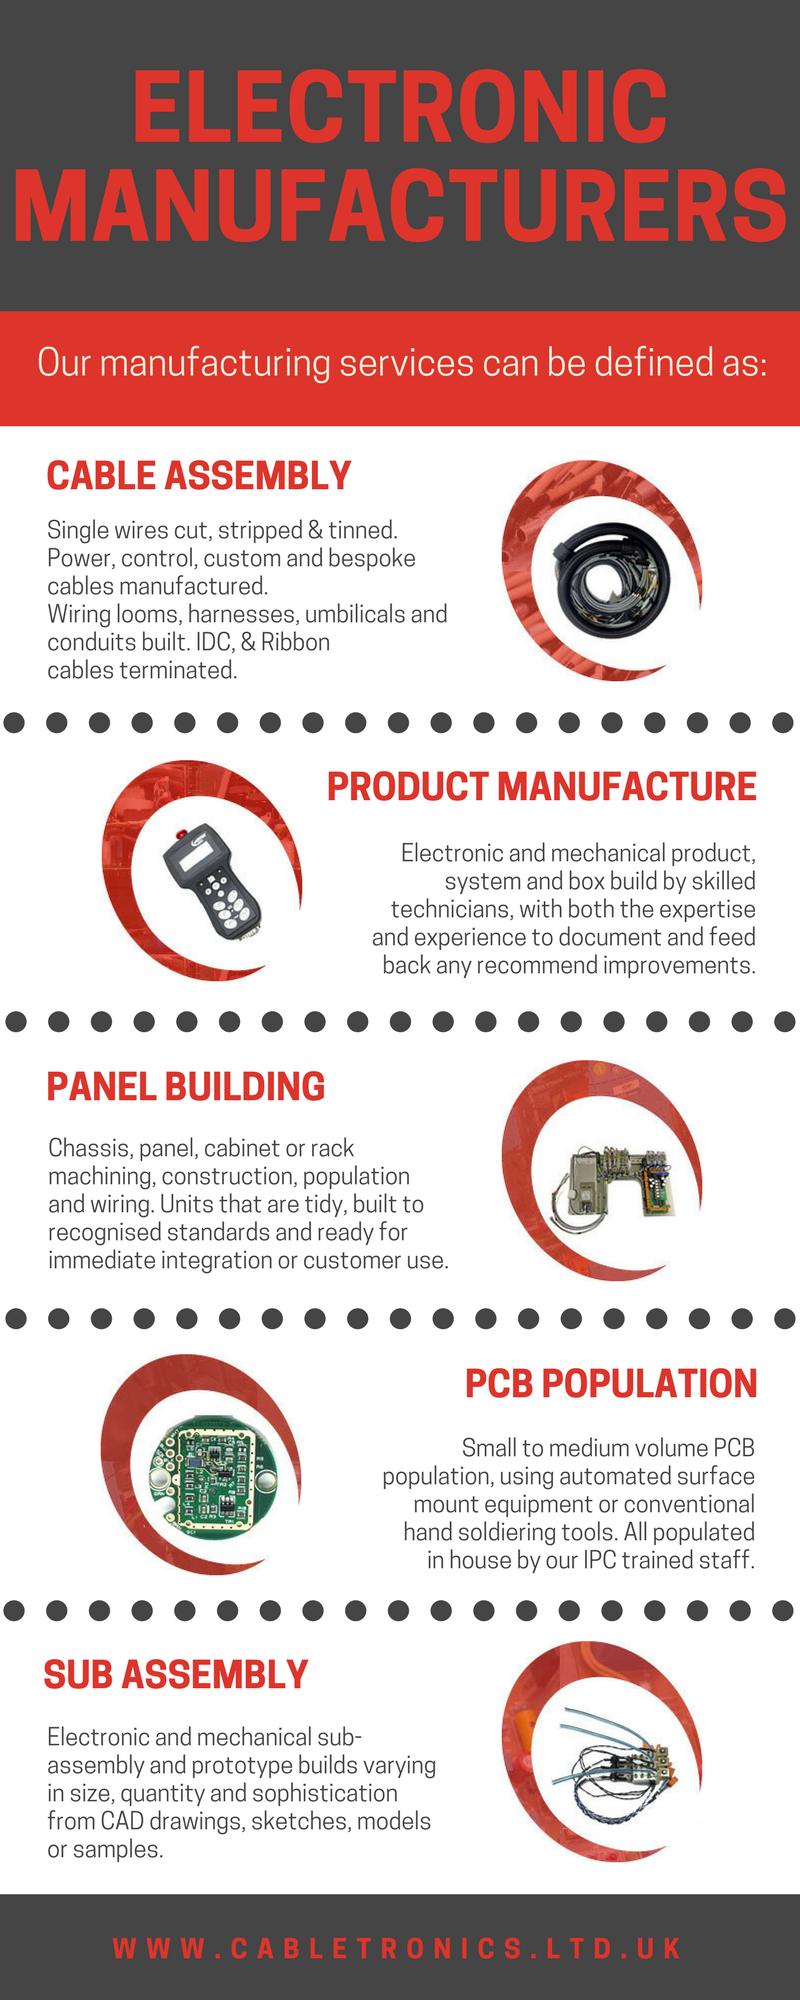 Different types of Services offered by Electronic Manufacturers